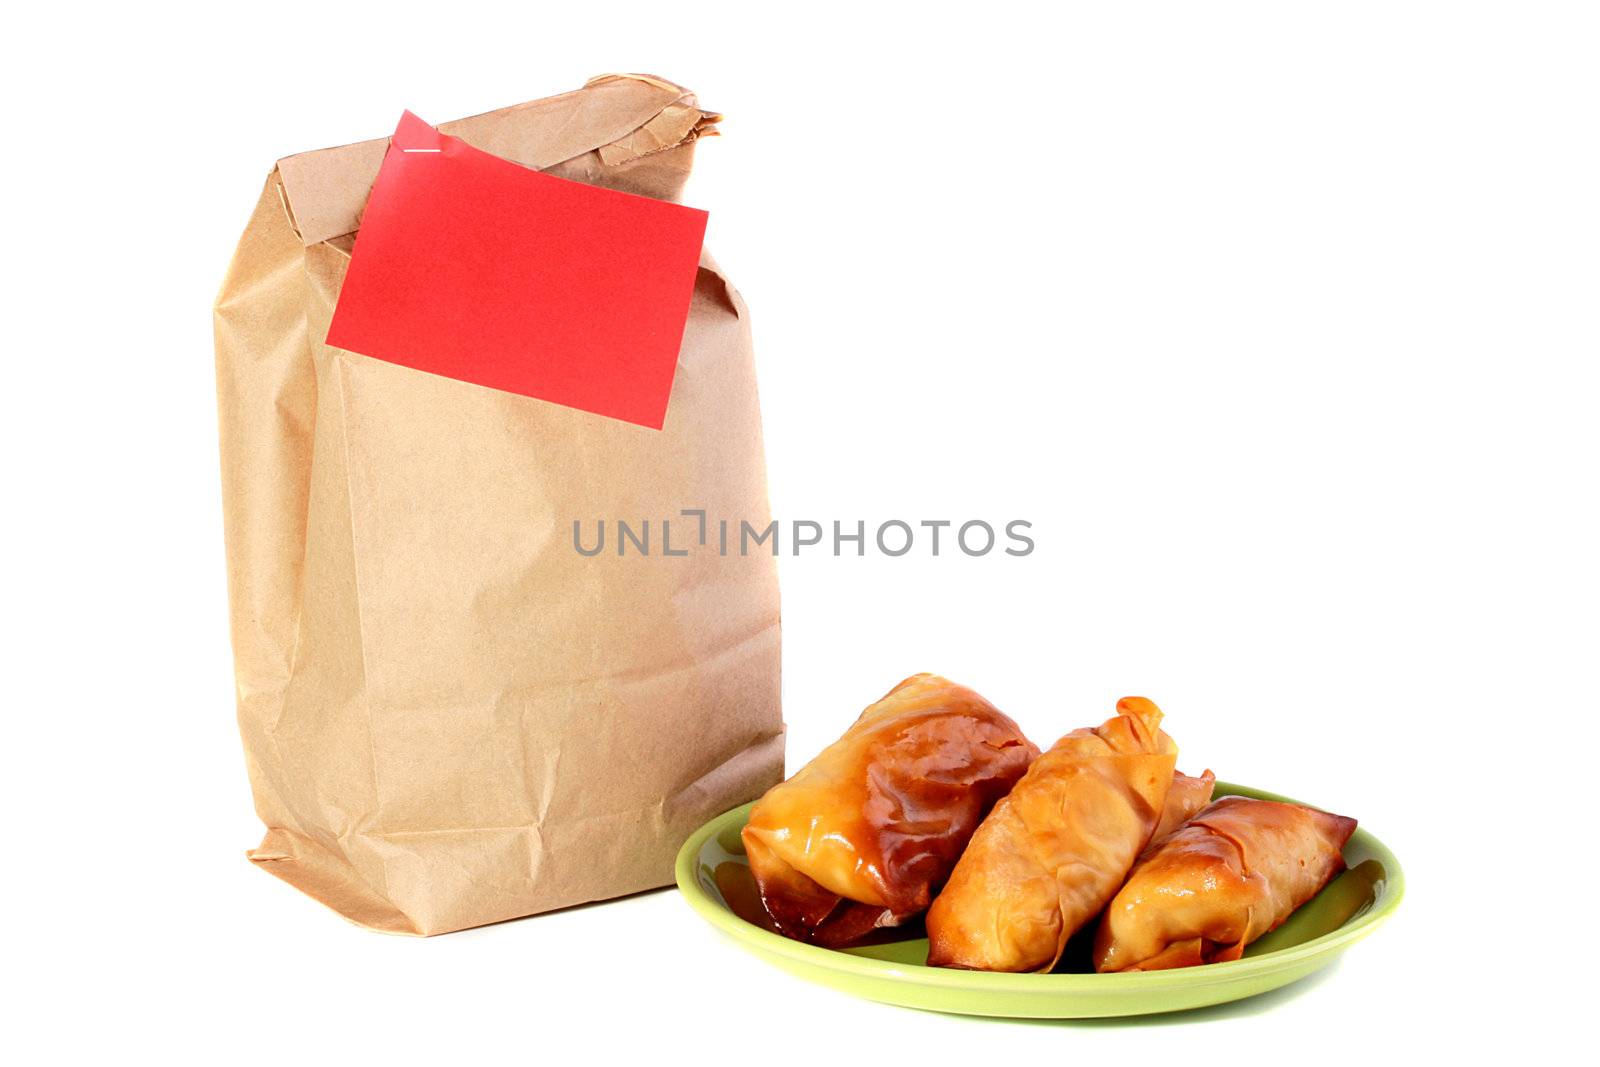 Paper package for a dinner at office or at school and pancakes with a stuffing on a plate.